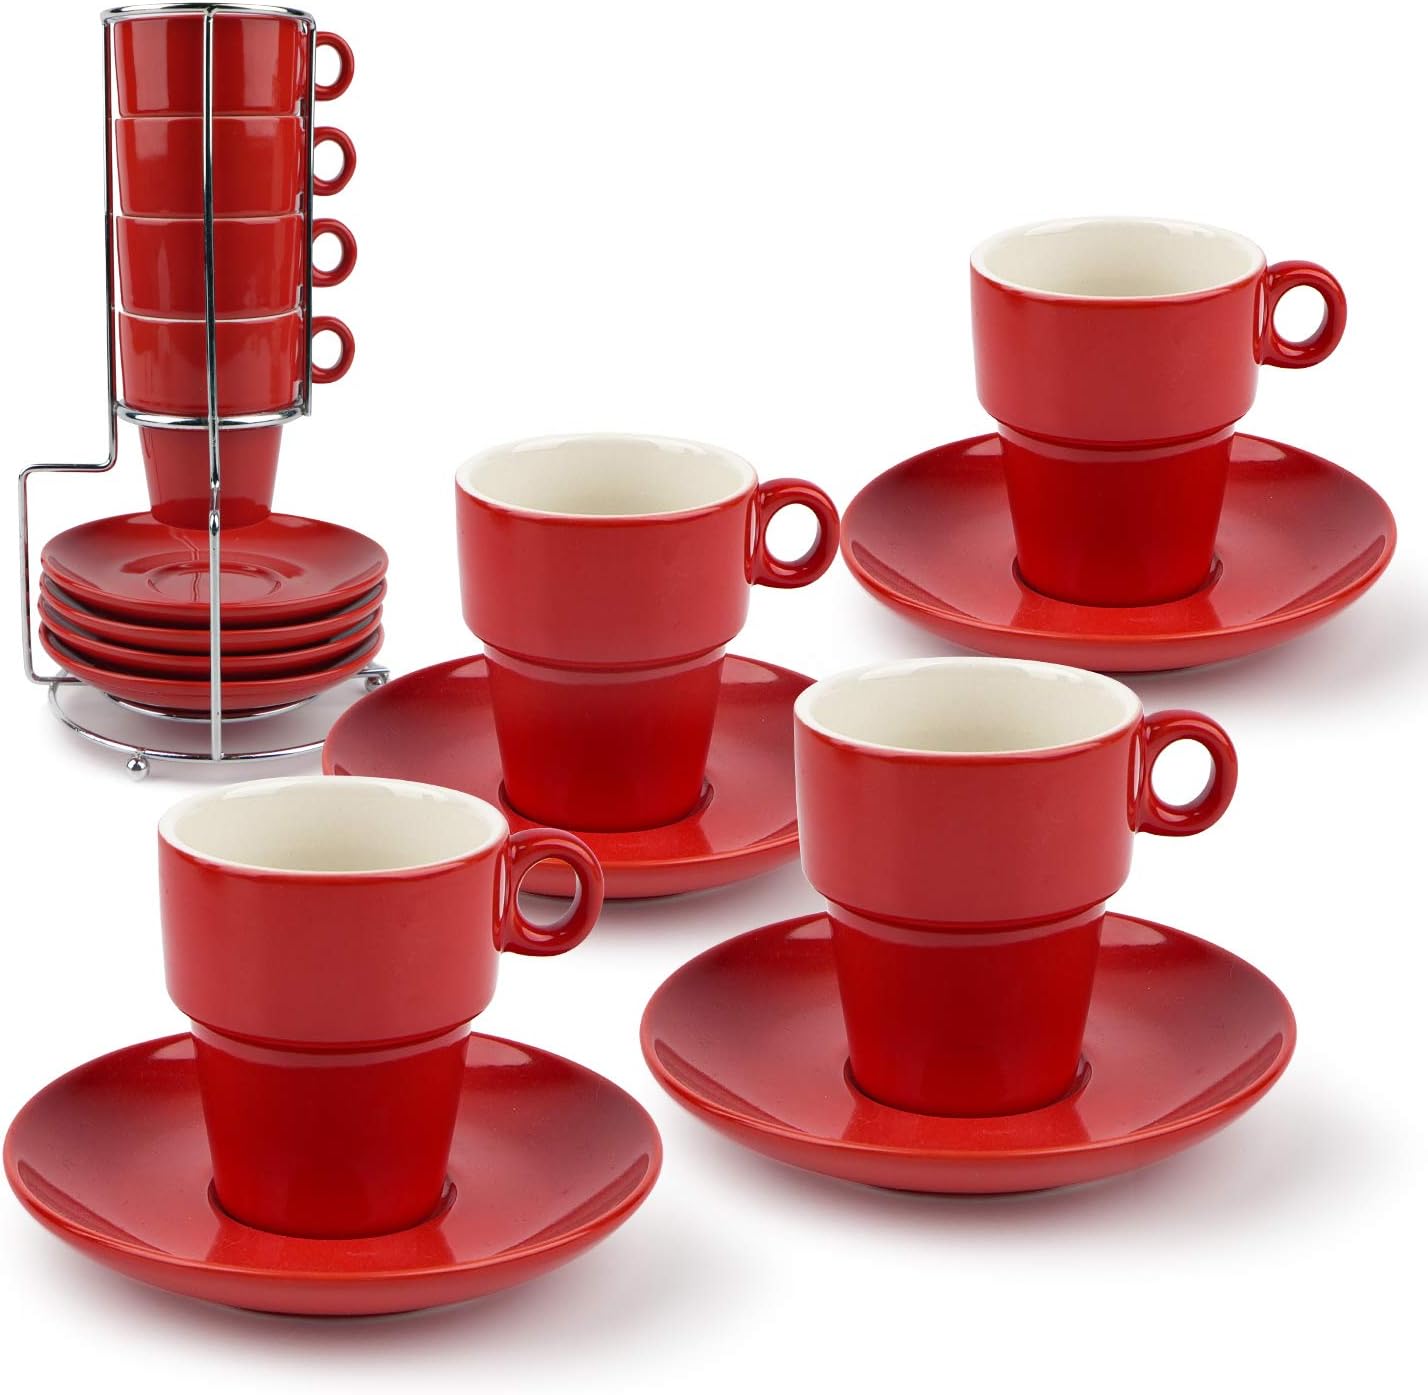 Espresso Cups with Saucers, Ceramic Demitasse Cups with Metal Stand- 3.3OZ/95MLStackable Espresso Mugs, for Specialty Coffee Drinks, Cappuccino and Tea - Set of 4